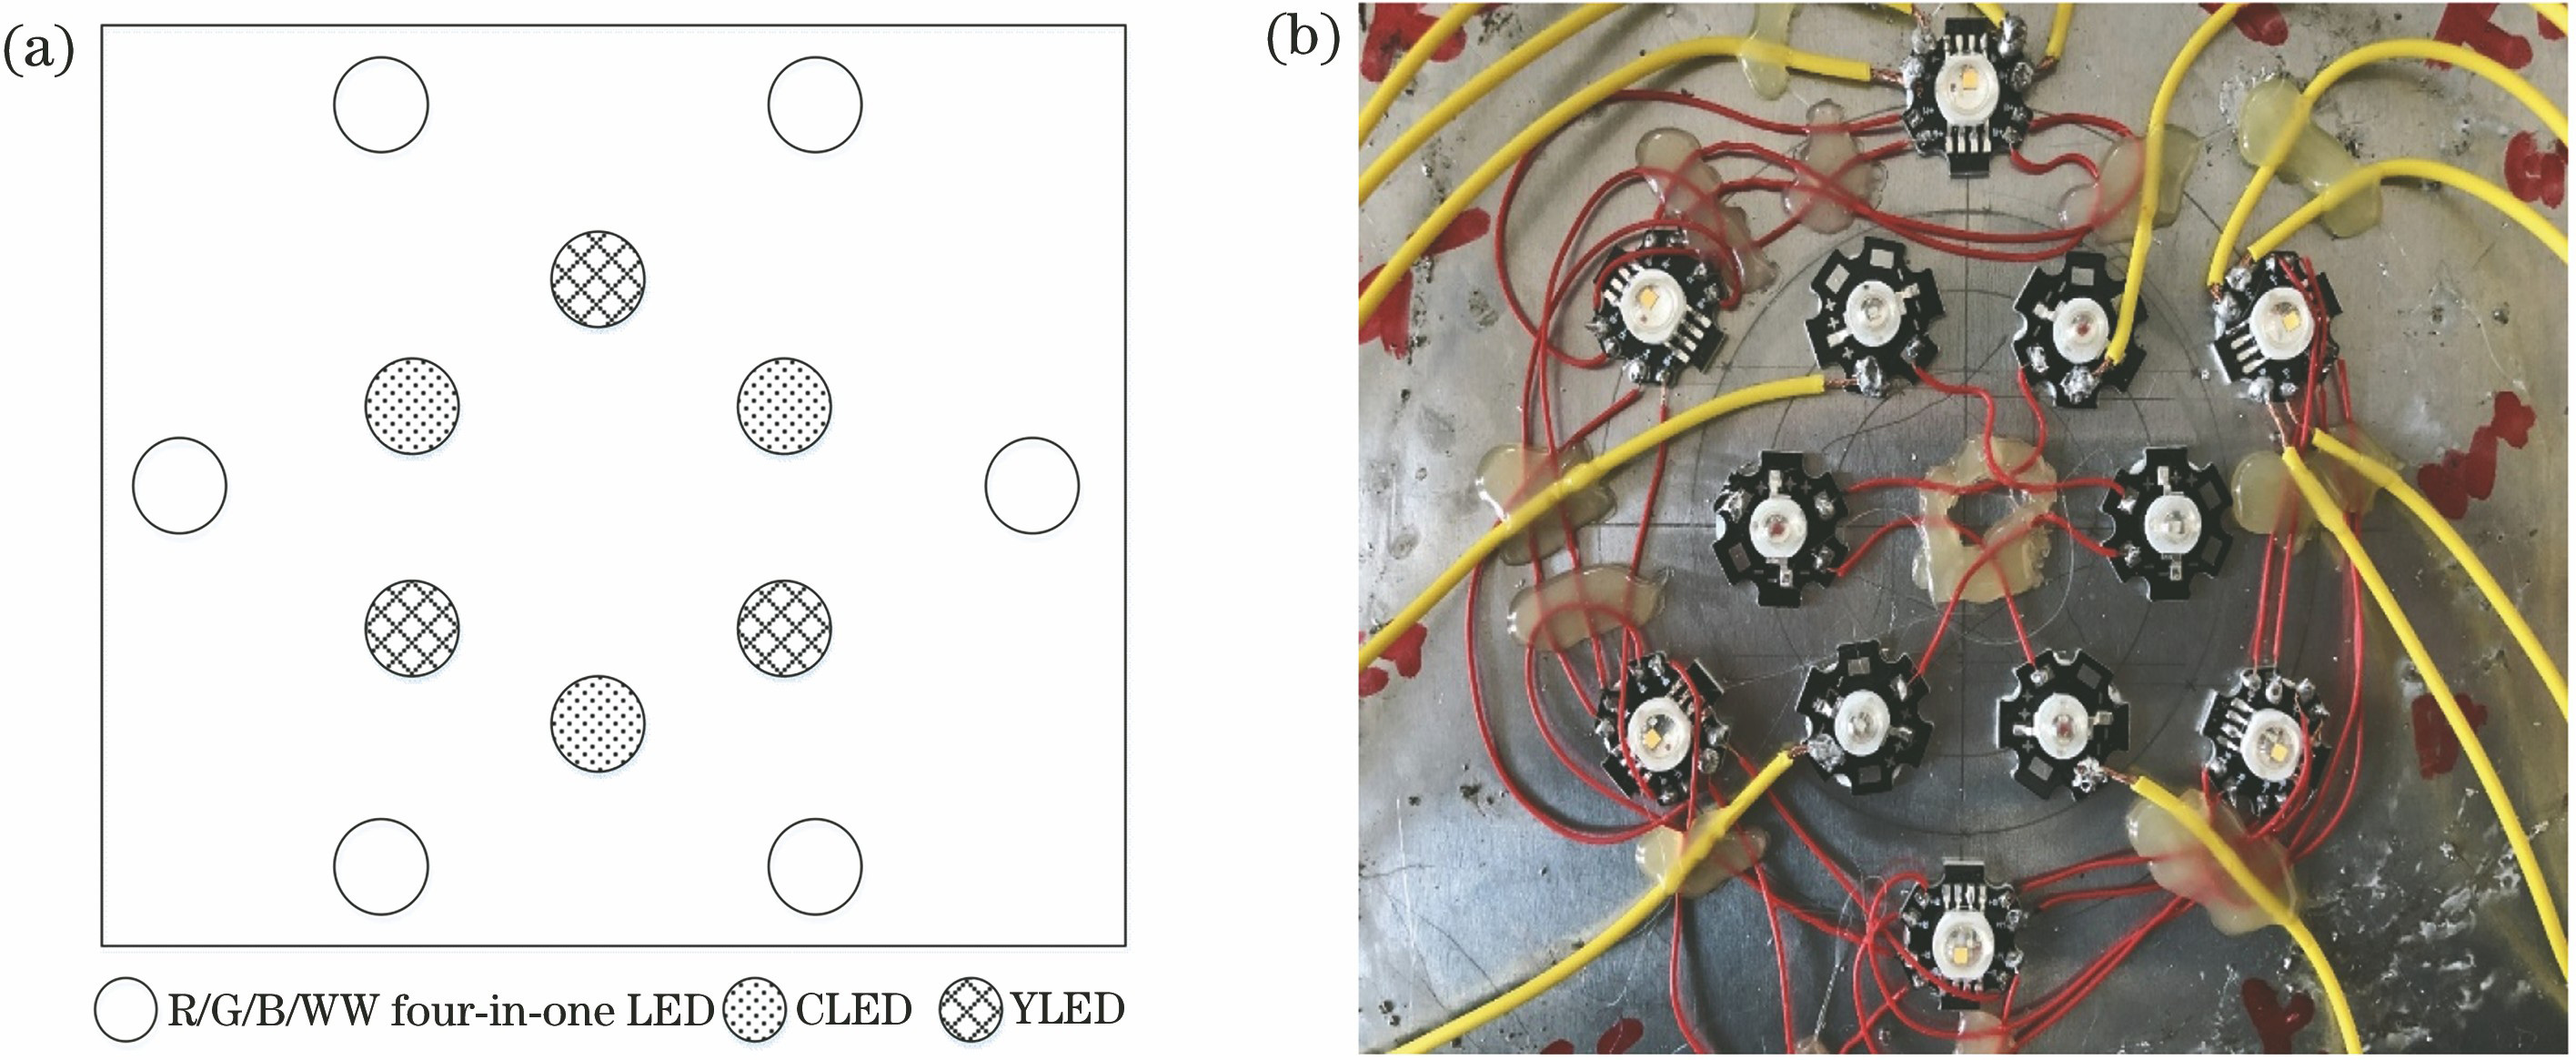 Light source module used in the experiment. (a) R/G/B/C/Y/WW LED lamp bead layout; (b) R/G/B/C/Y/WW LED physical drawing of light source